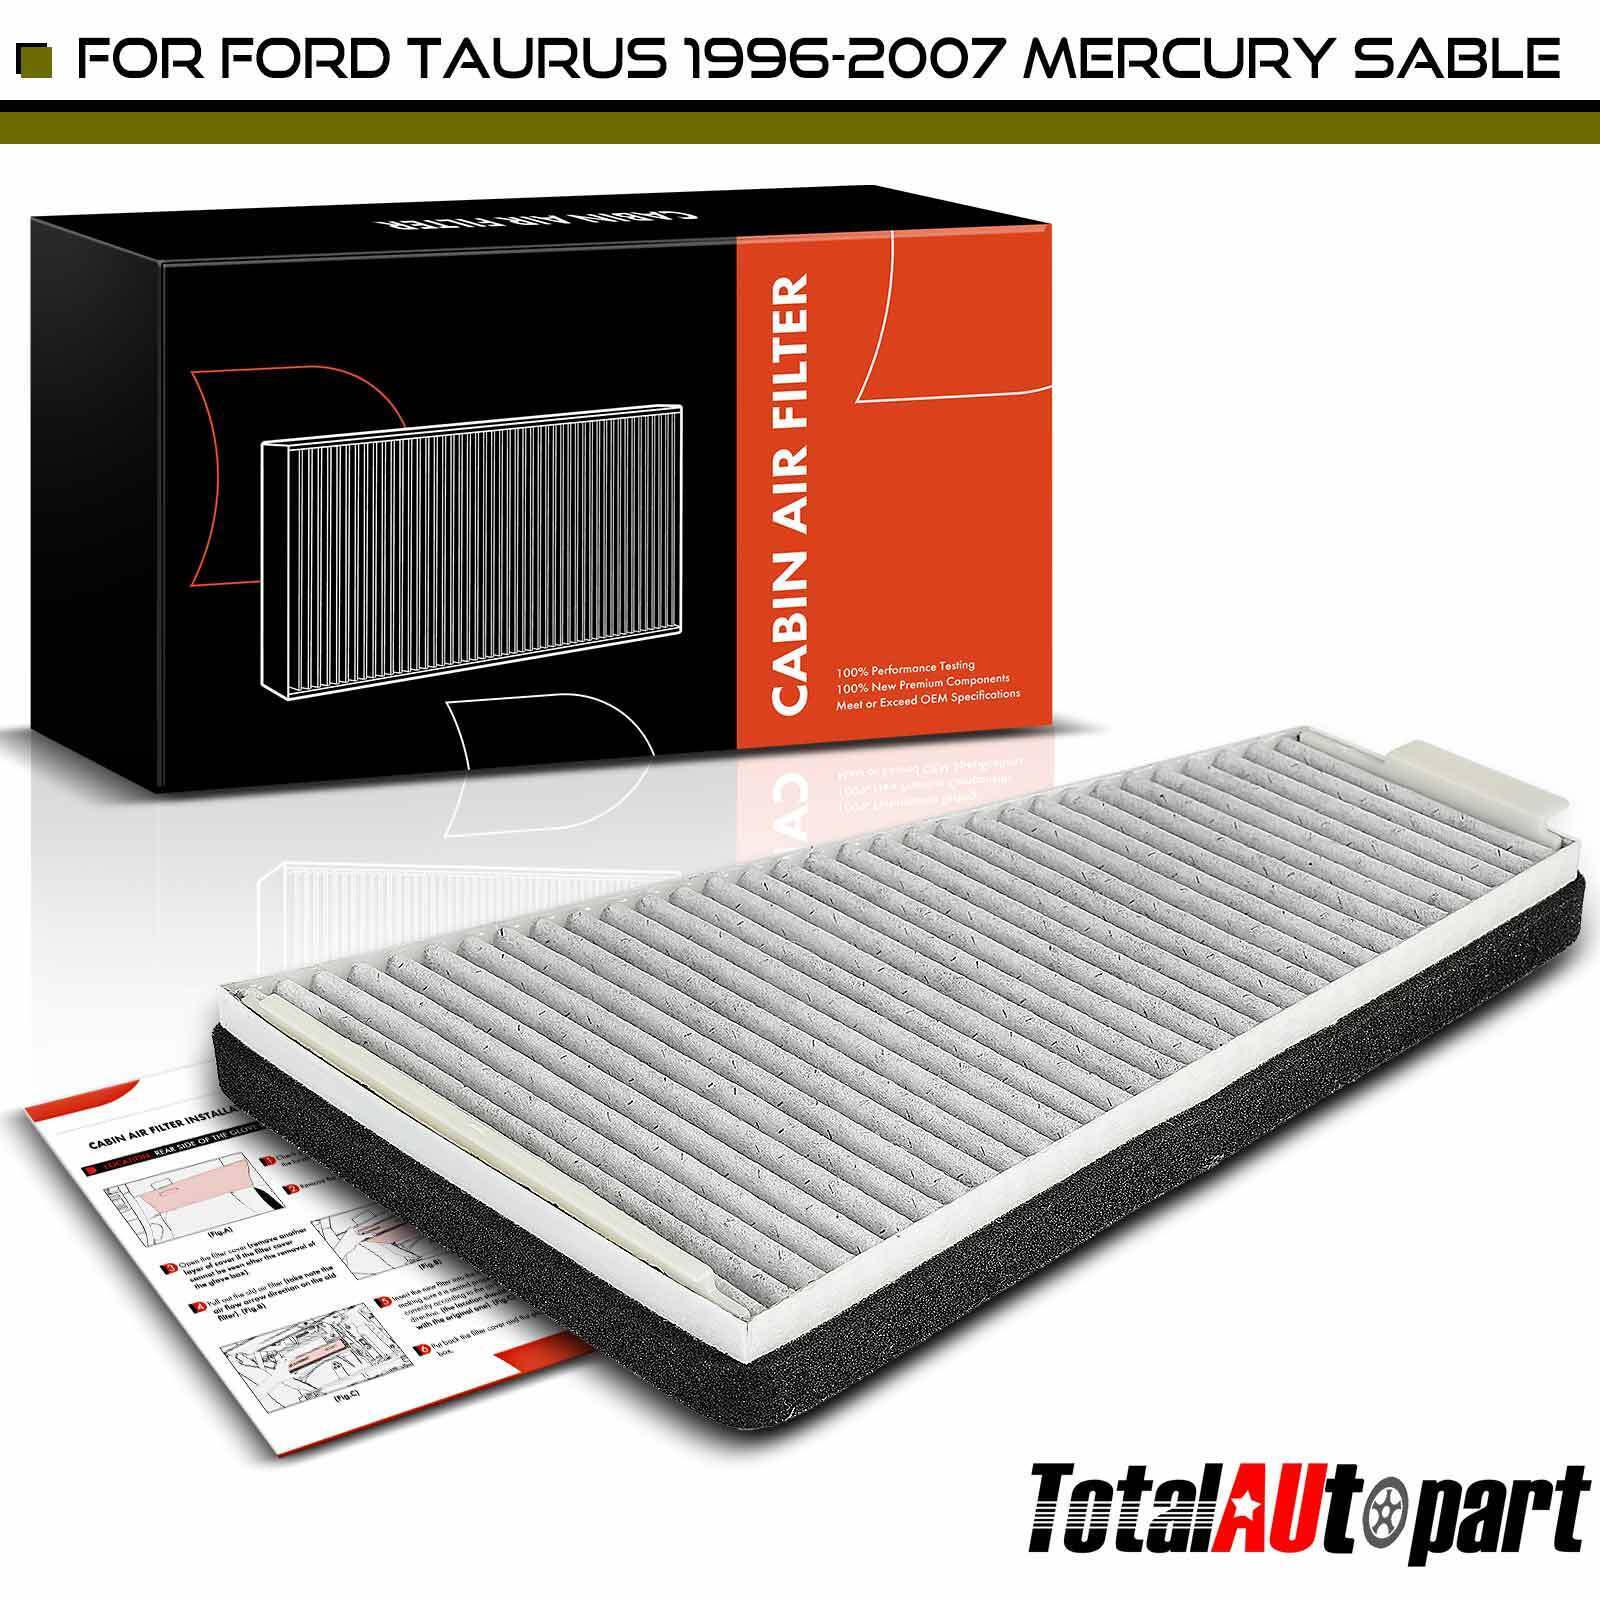 Activated Carbon Cabin Air Filter for Mercury Sable Ford Taurus 96-07 Under Hood